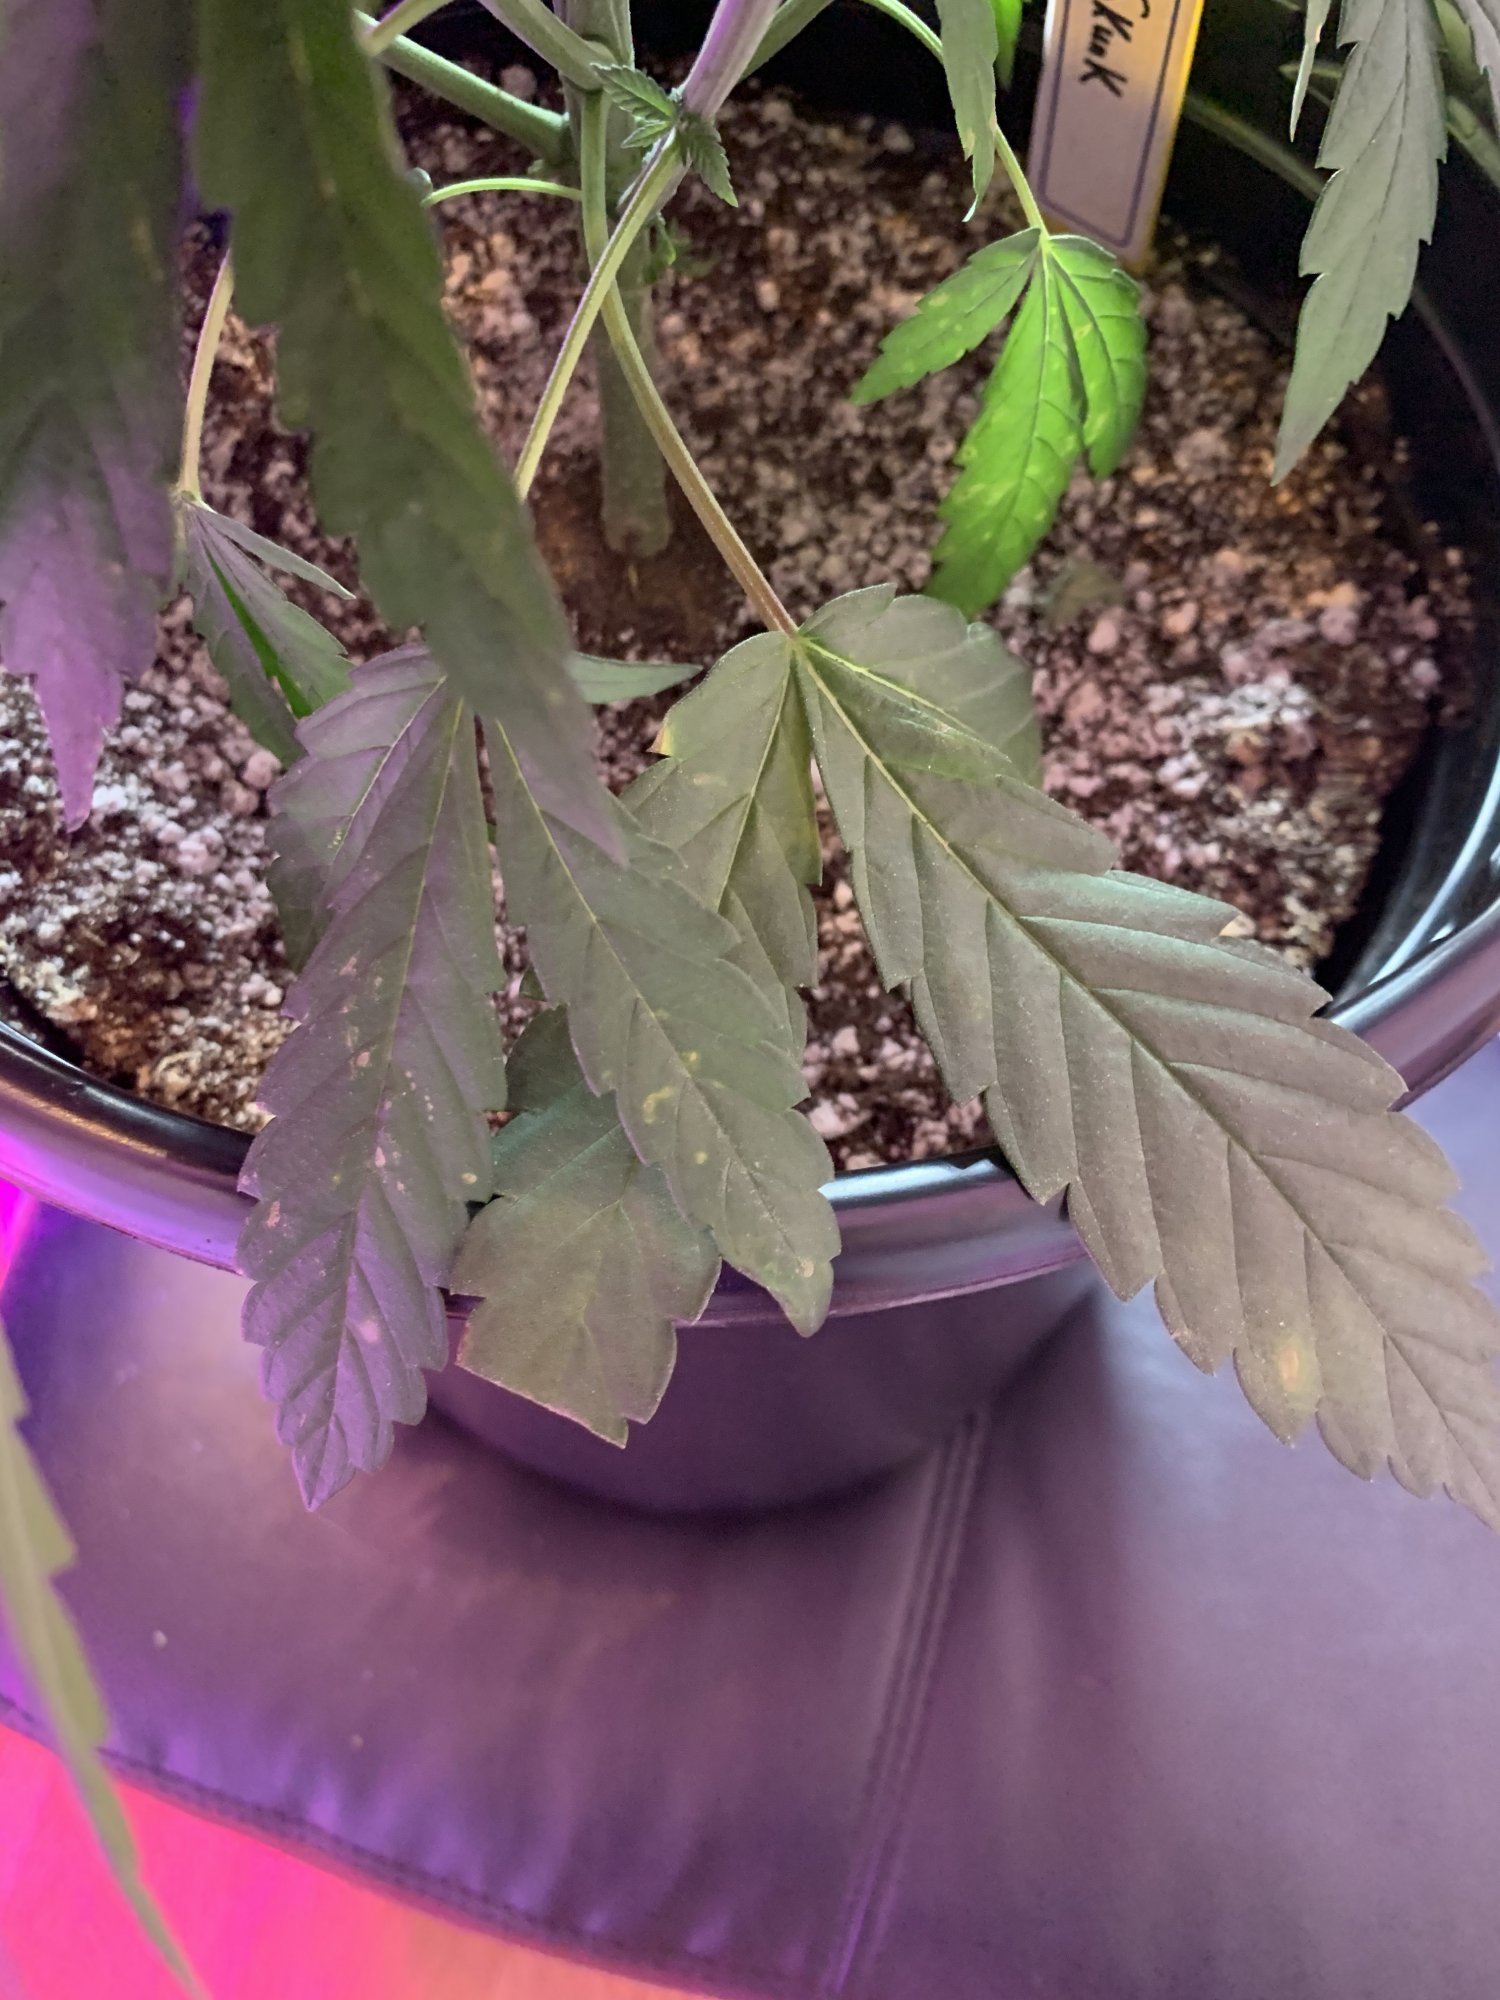 What deficiency could this be 3